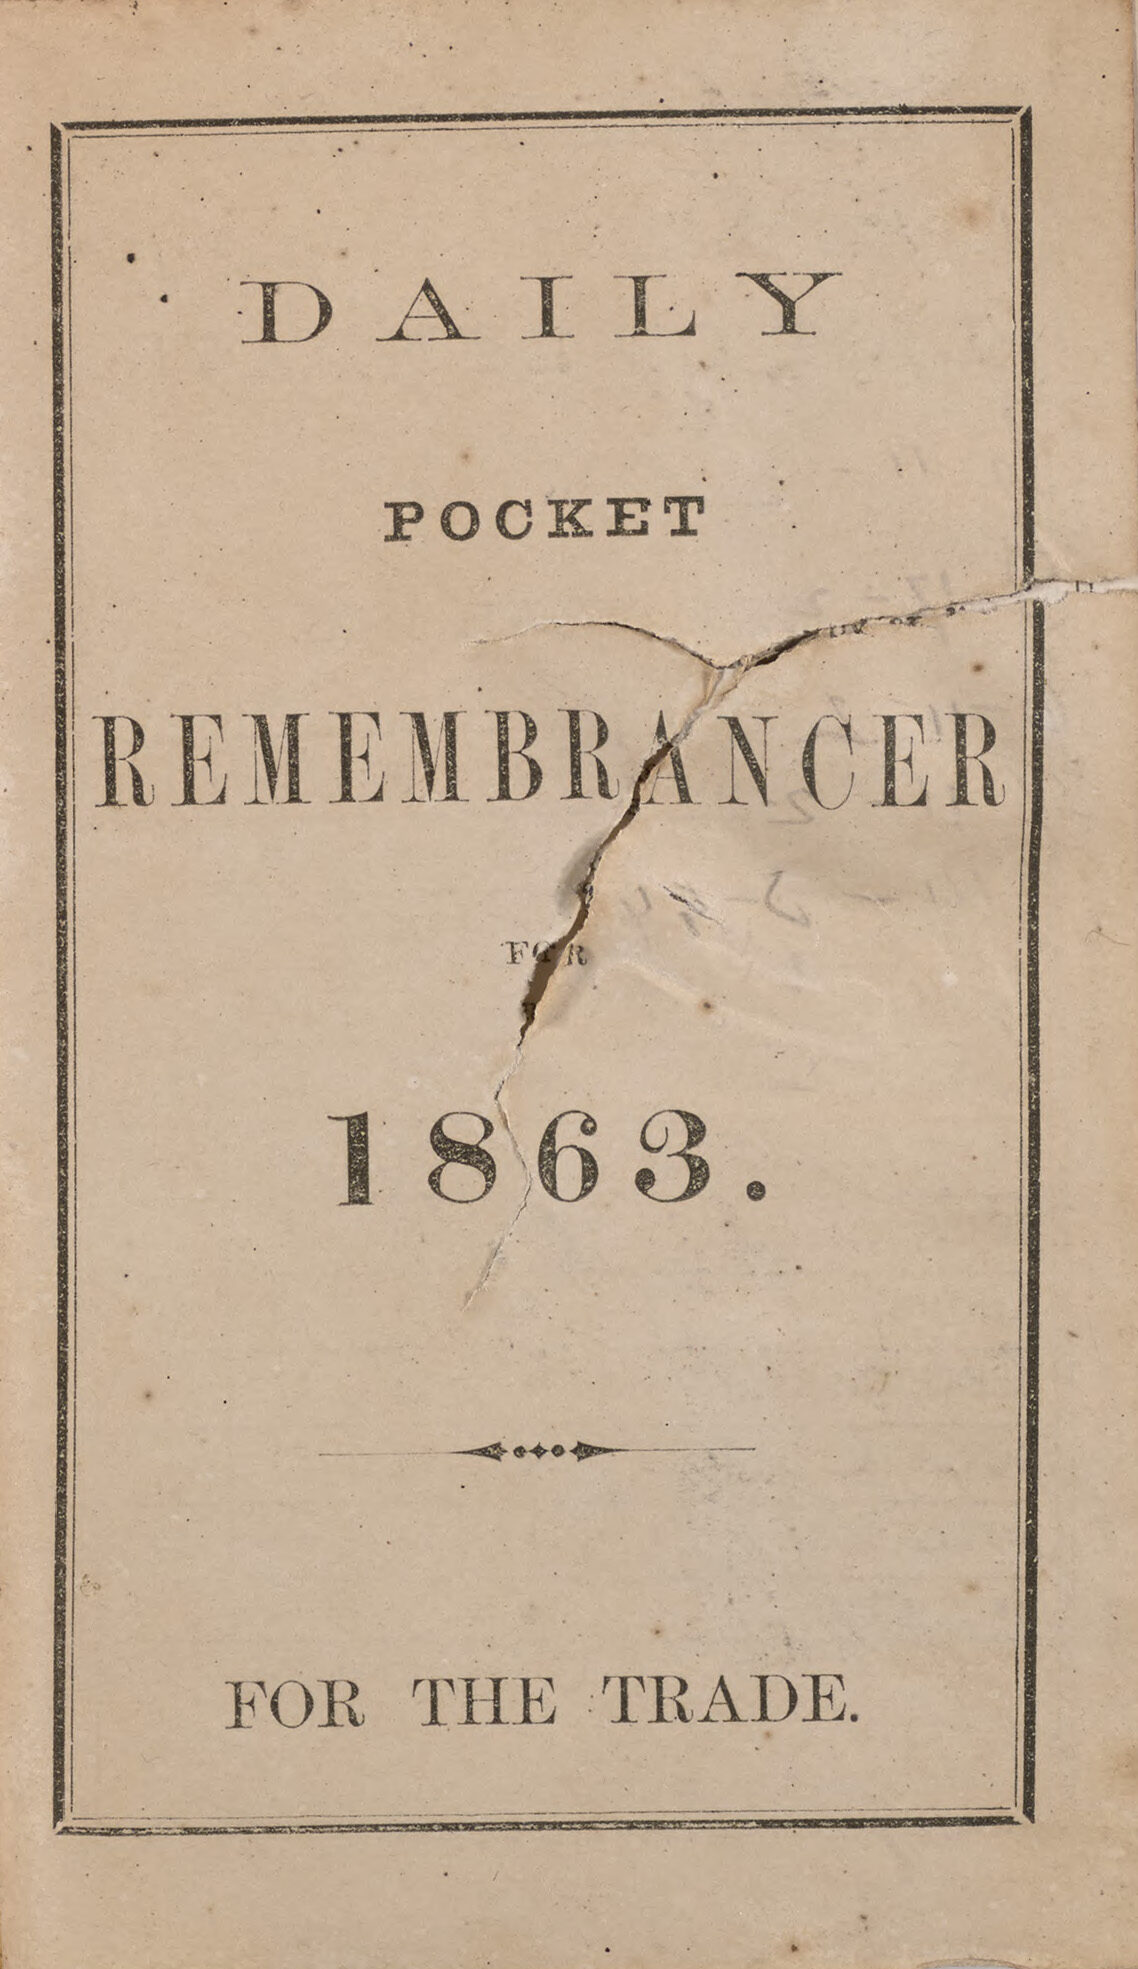 Bullet-damaged page "Daily Pocket Rembrancer 1863 for the Trade".